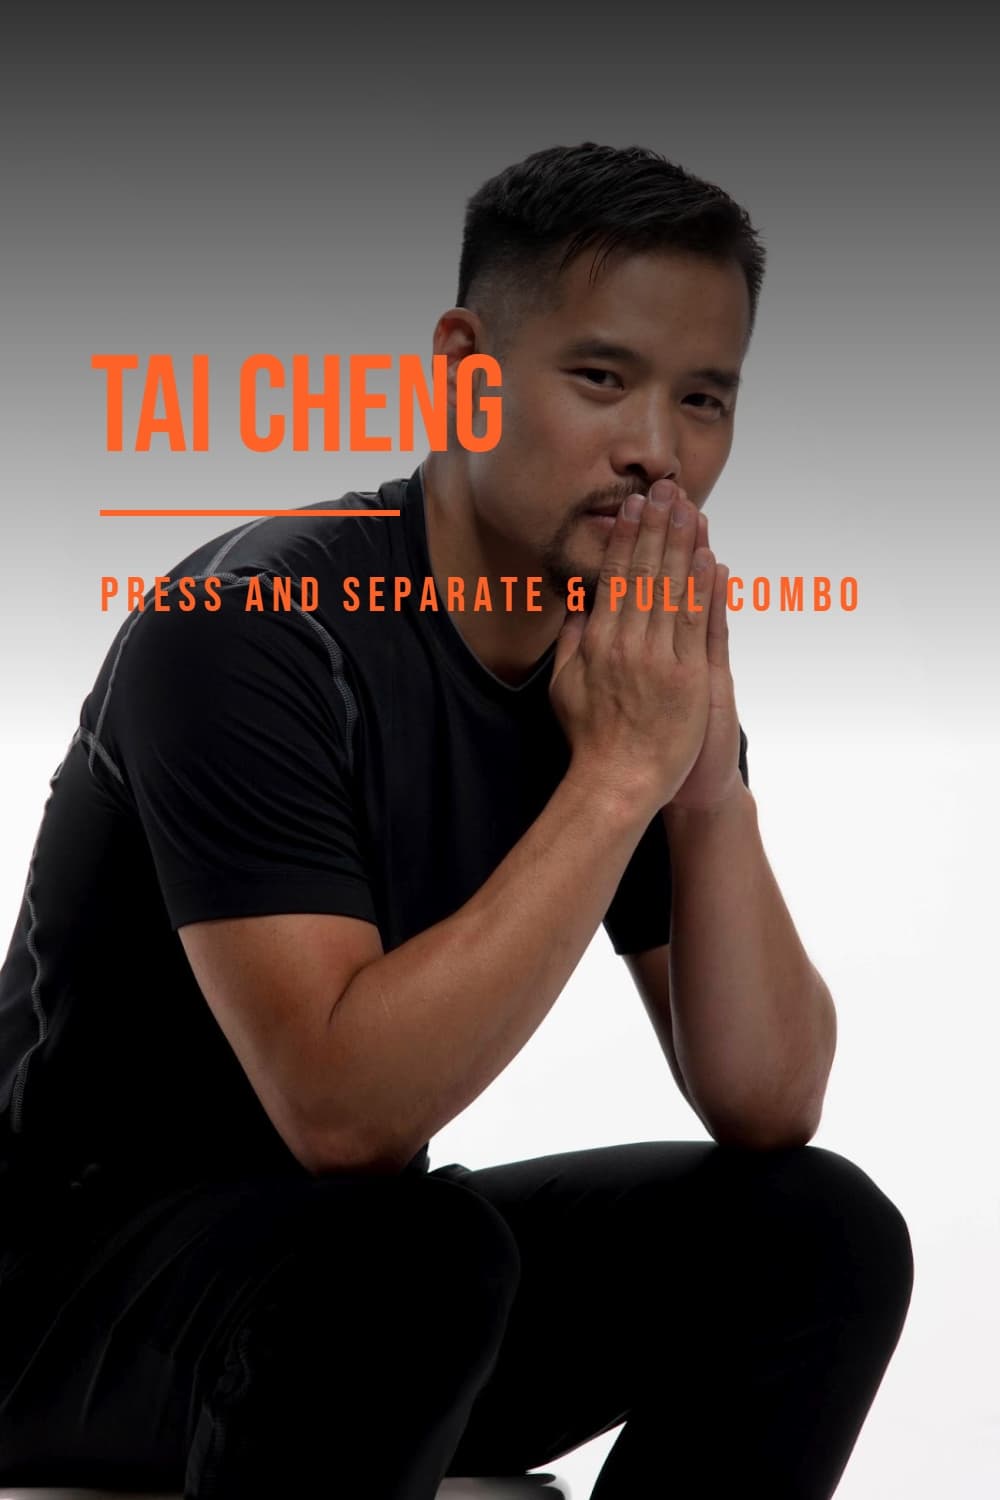 Tai Cheng - Press and Separate & Pull Combo